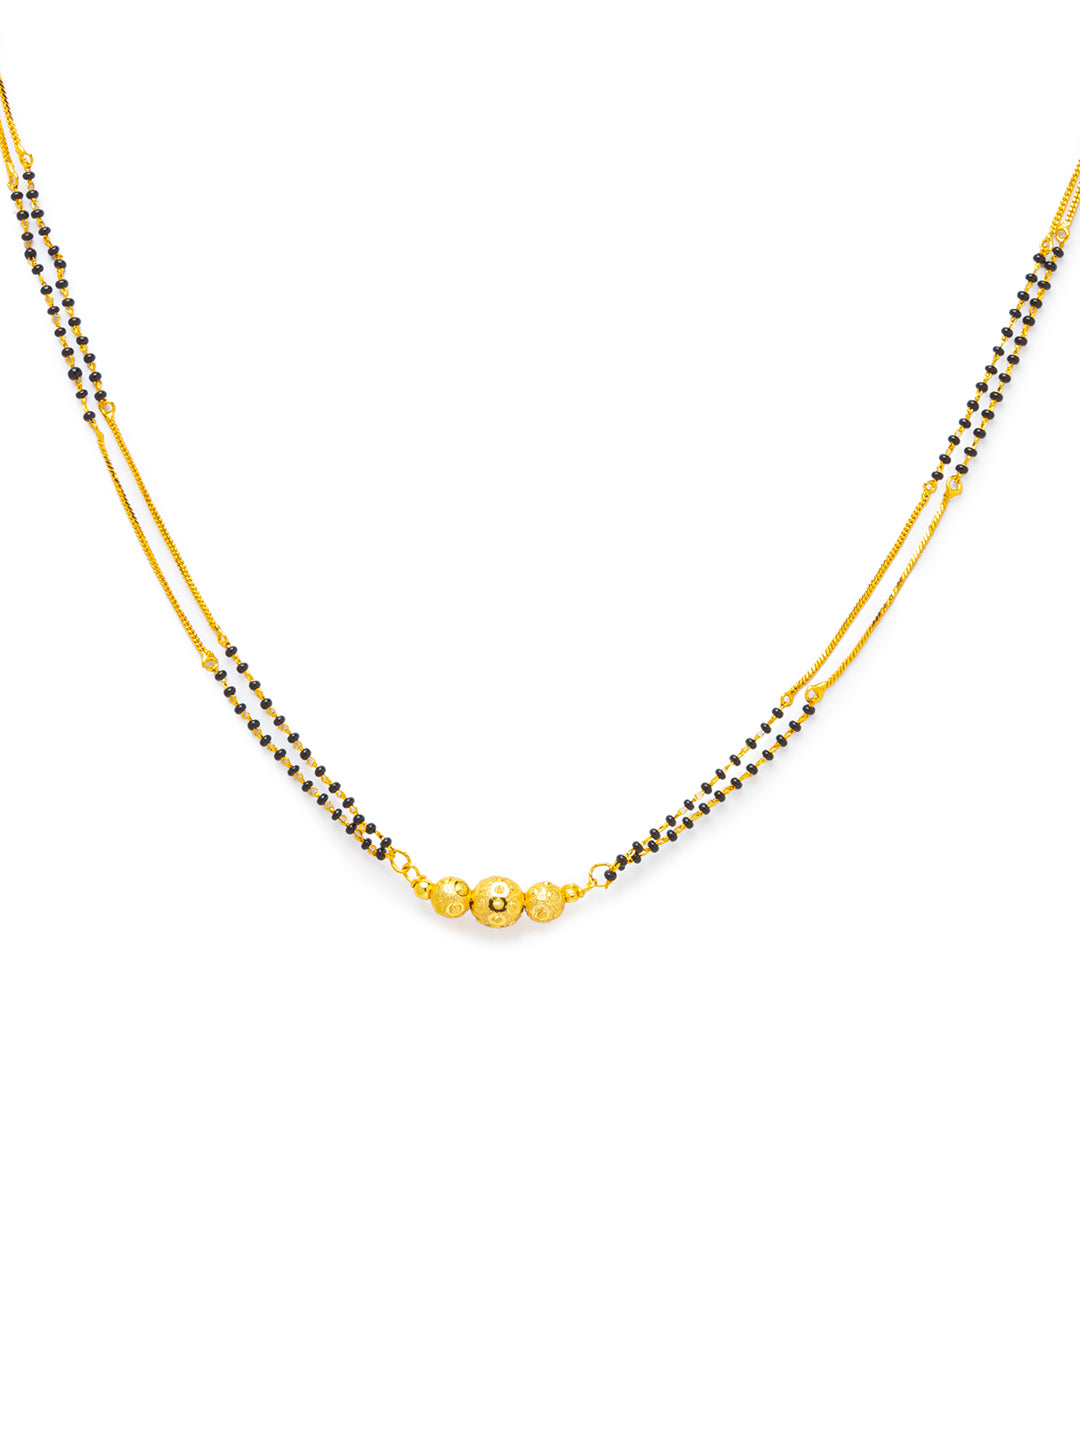 Digital Dress Room Digital Dress Room One Gram Gold Plated Long Mangalsutra मंगलसूत्र Latest Design Tanmaniya/Long Gold Chain/Black Beads New Mangalsutra Designs For Women (28 Inches) 